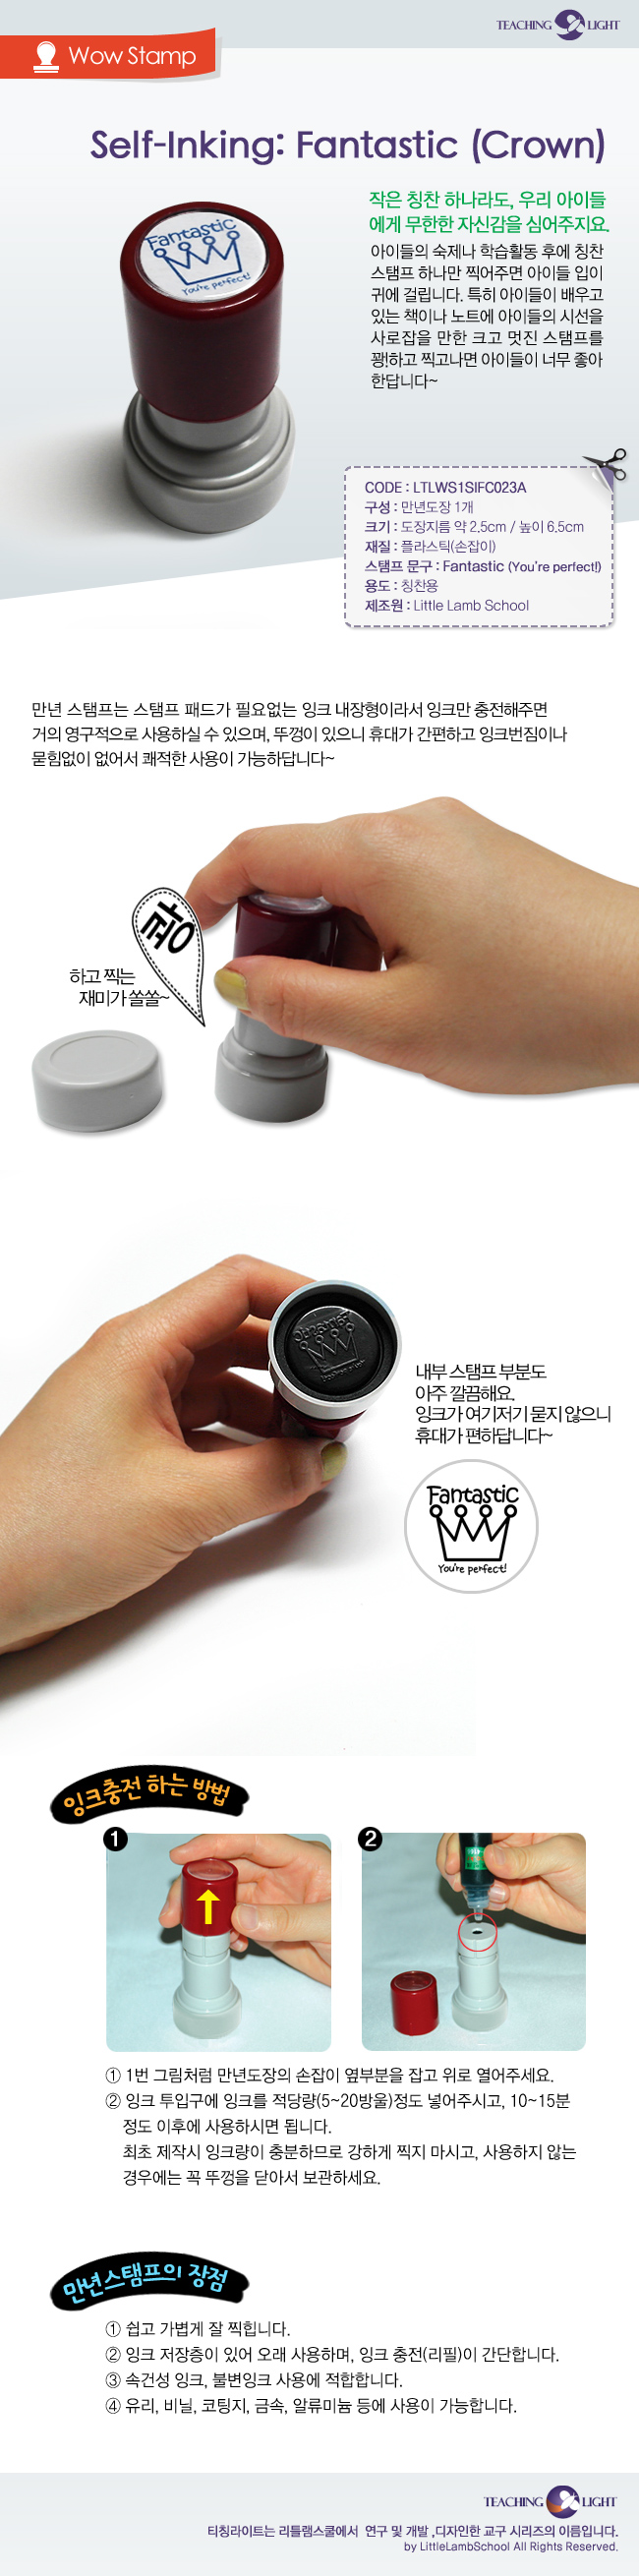 [stamp] 만년도장 You Did It (Rabbit)/ (Self-Inking: You Did It (Rabbit)) 